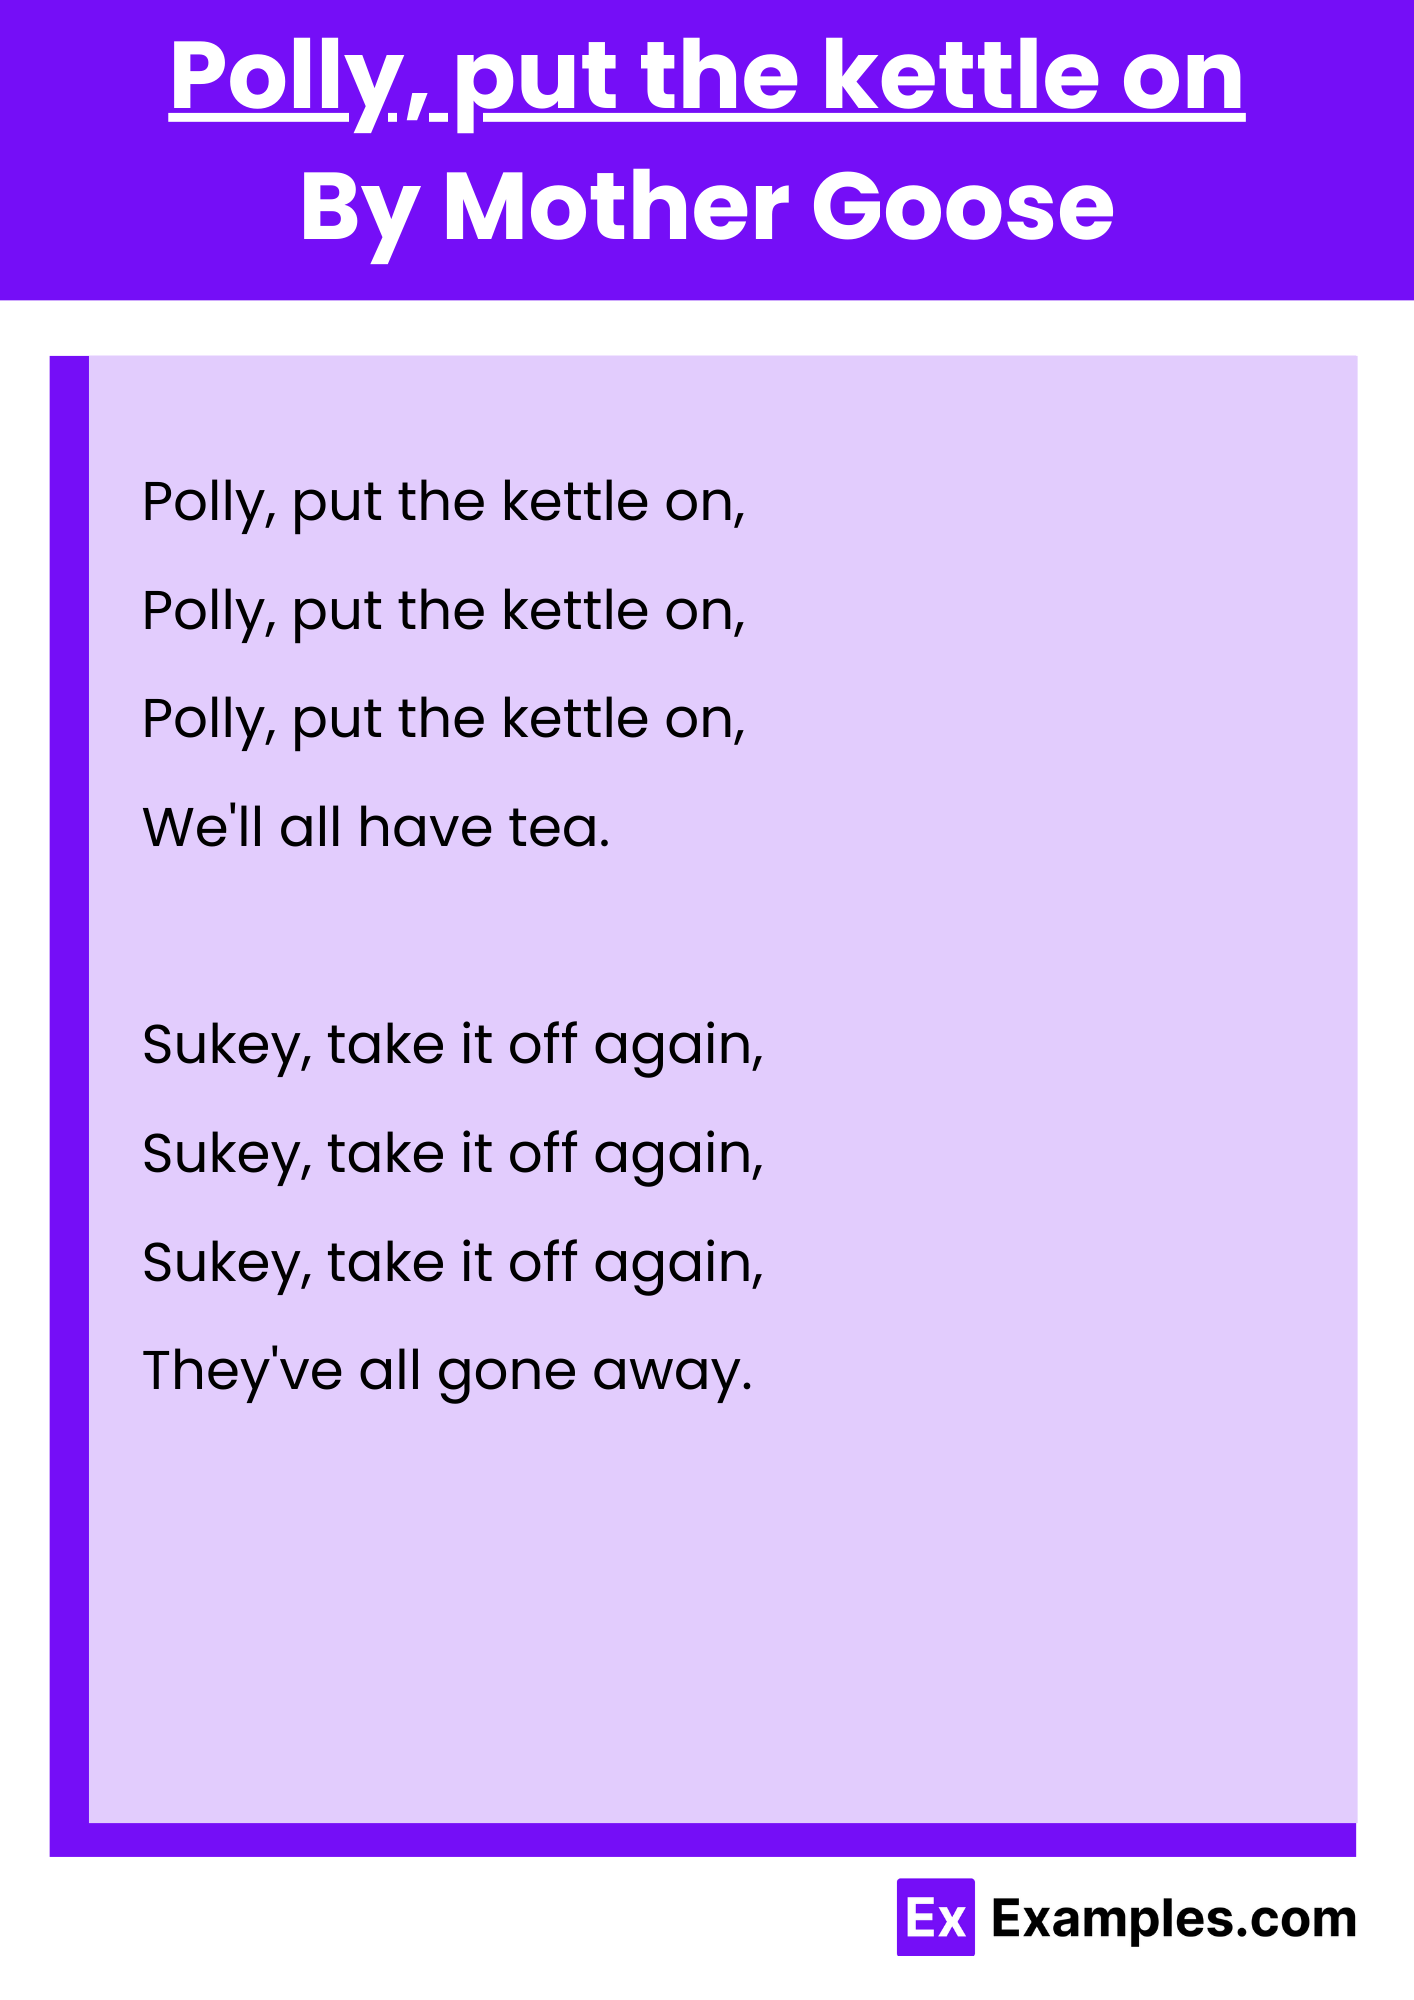 Polly, put the kettle on By Mother Goose